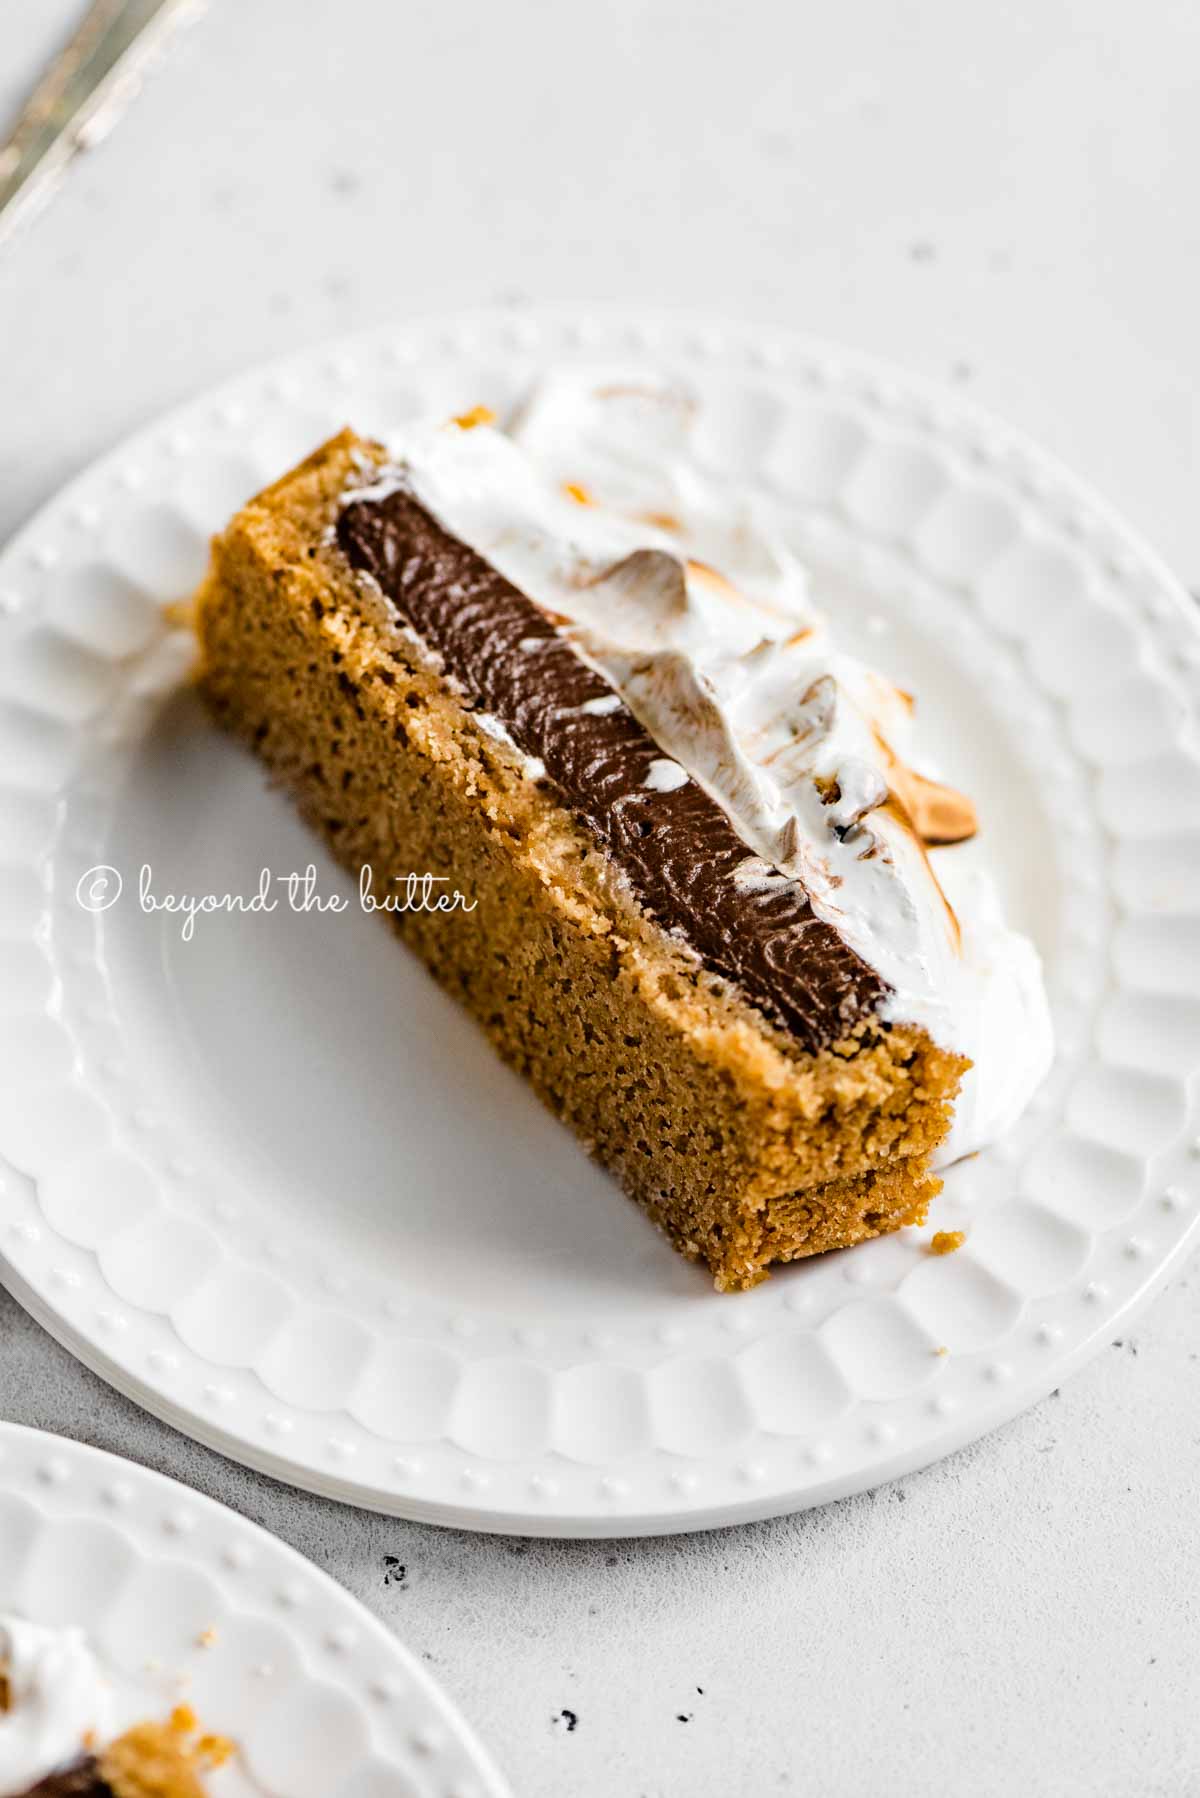 Images of one slice of chocolate marshmallow tart | All Images © Beyond the Butter™